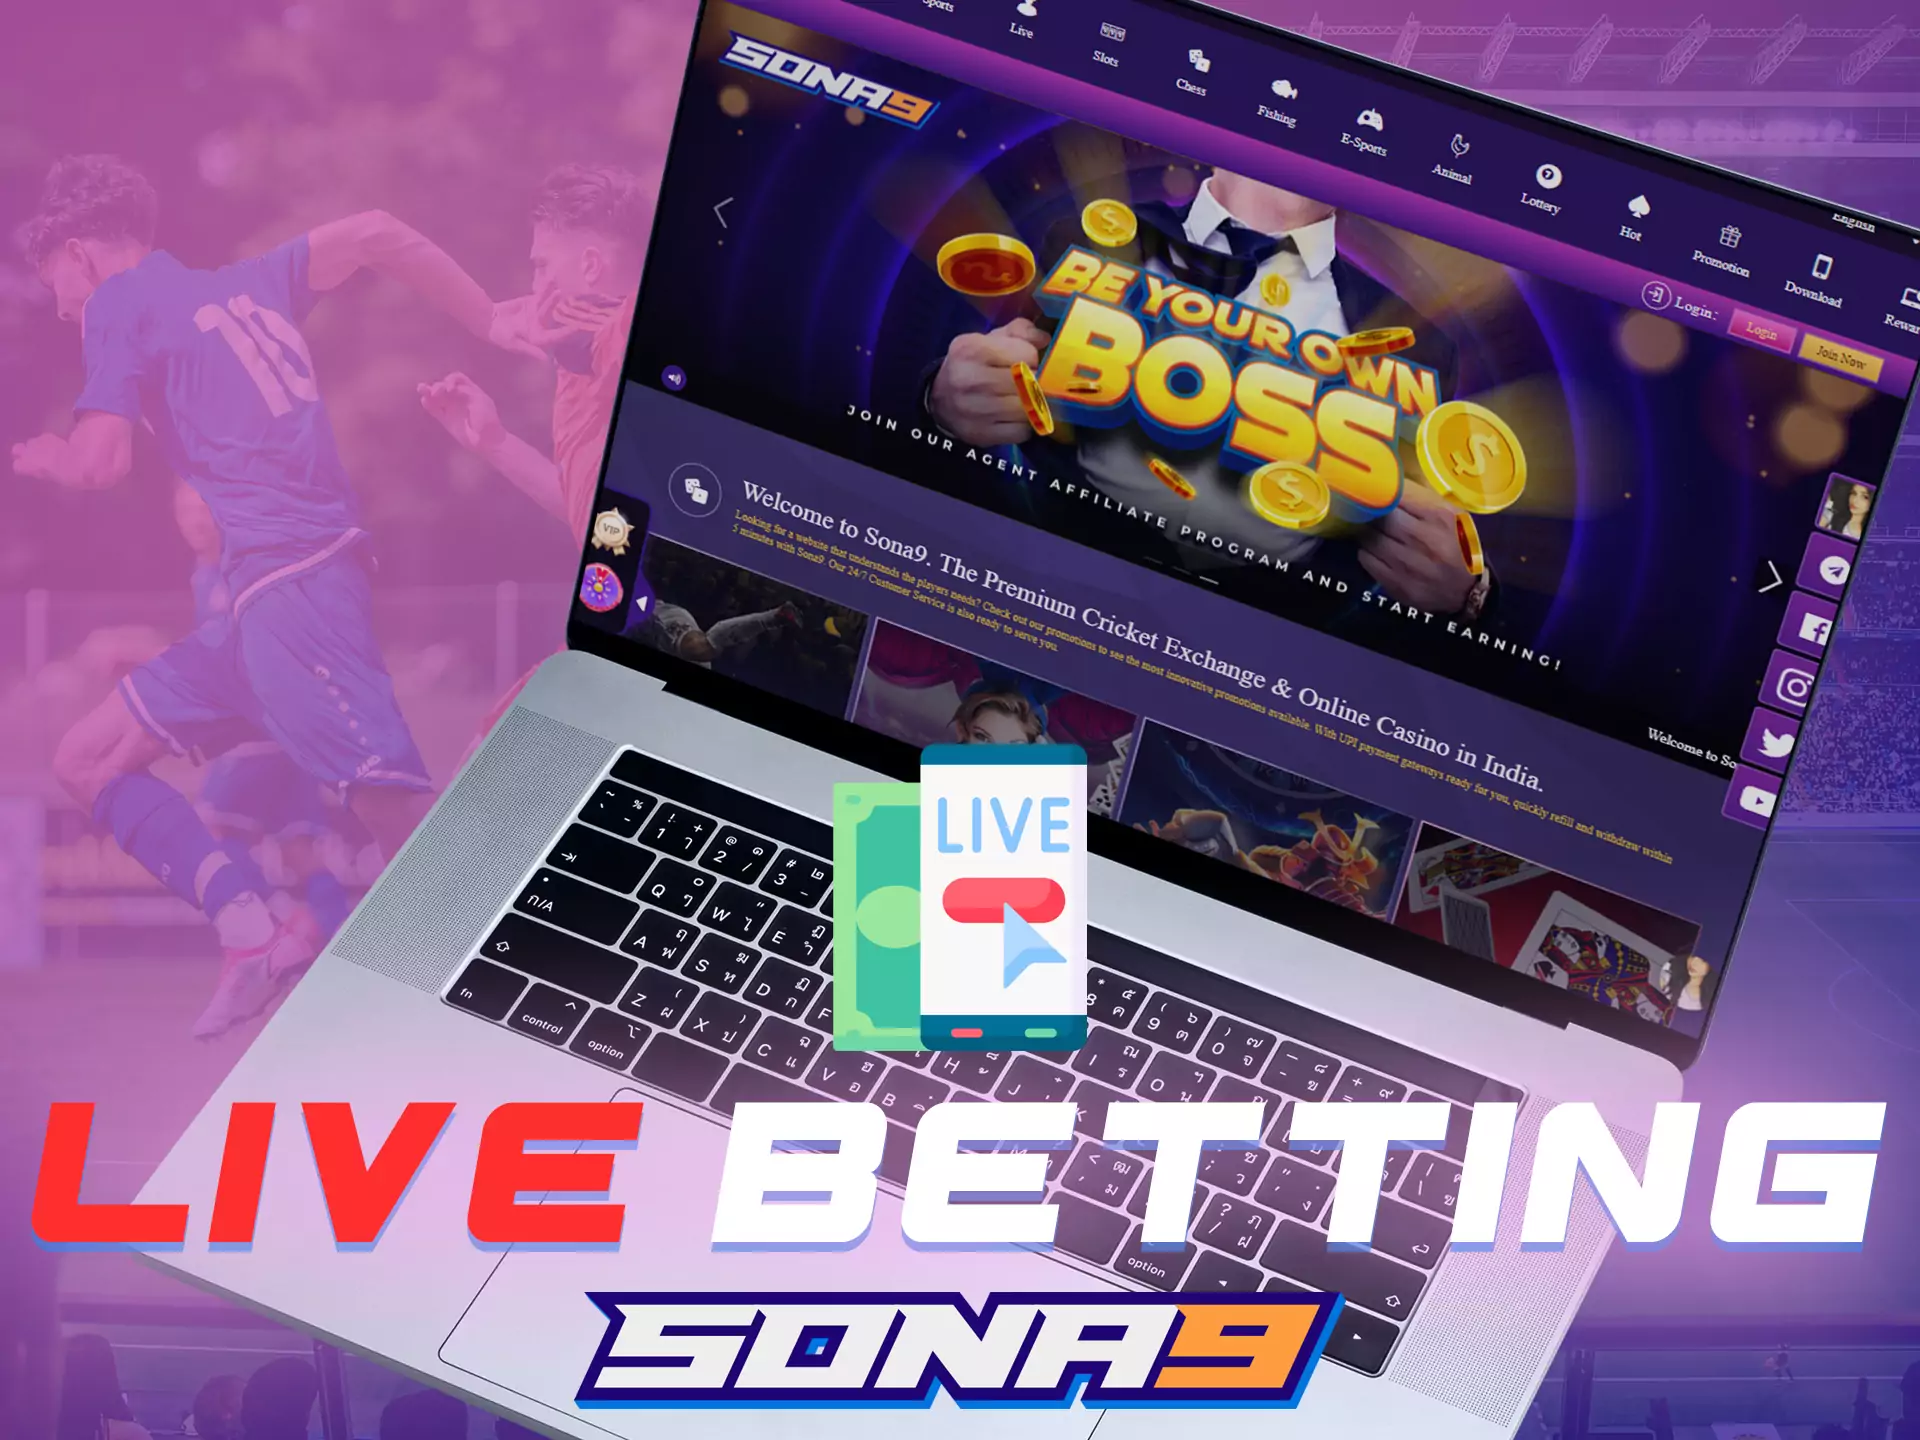 On the Sona9 website, you can place bets even on live events.